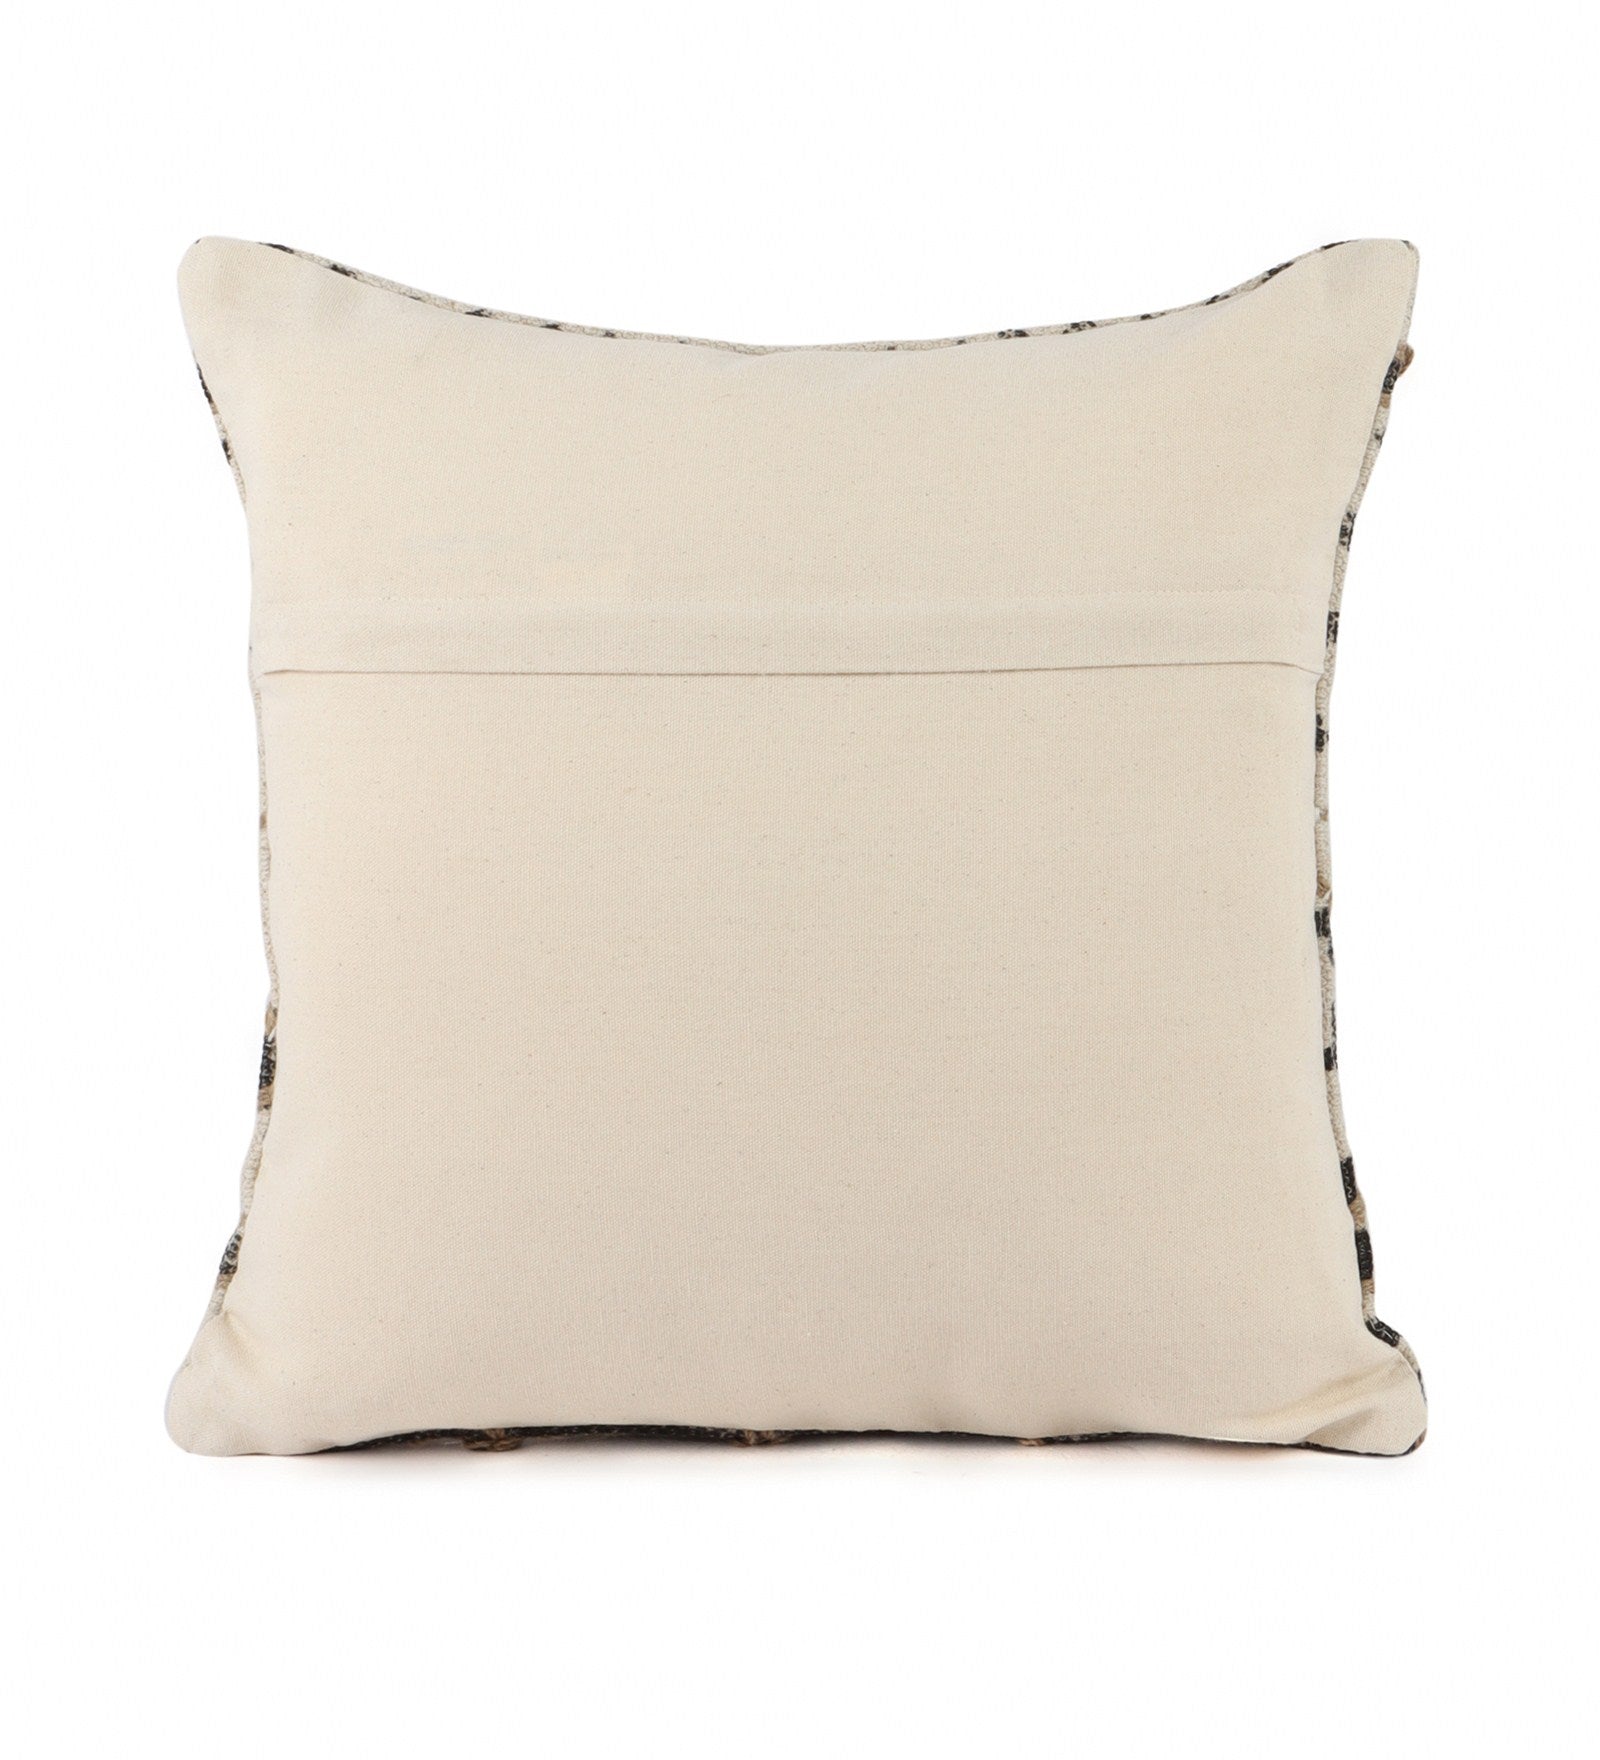 Embroidered Contemporary Cushion Cover (Beige-Black Swirls)